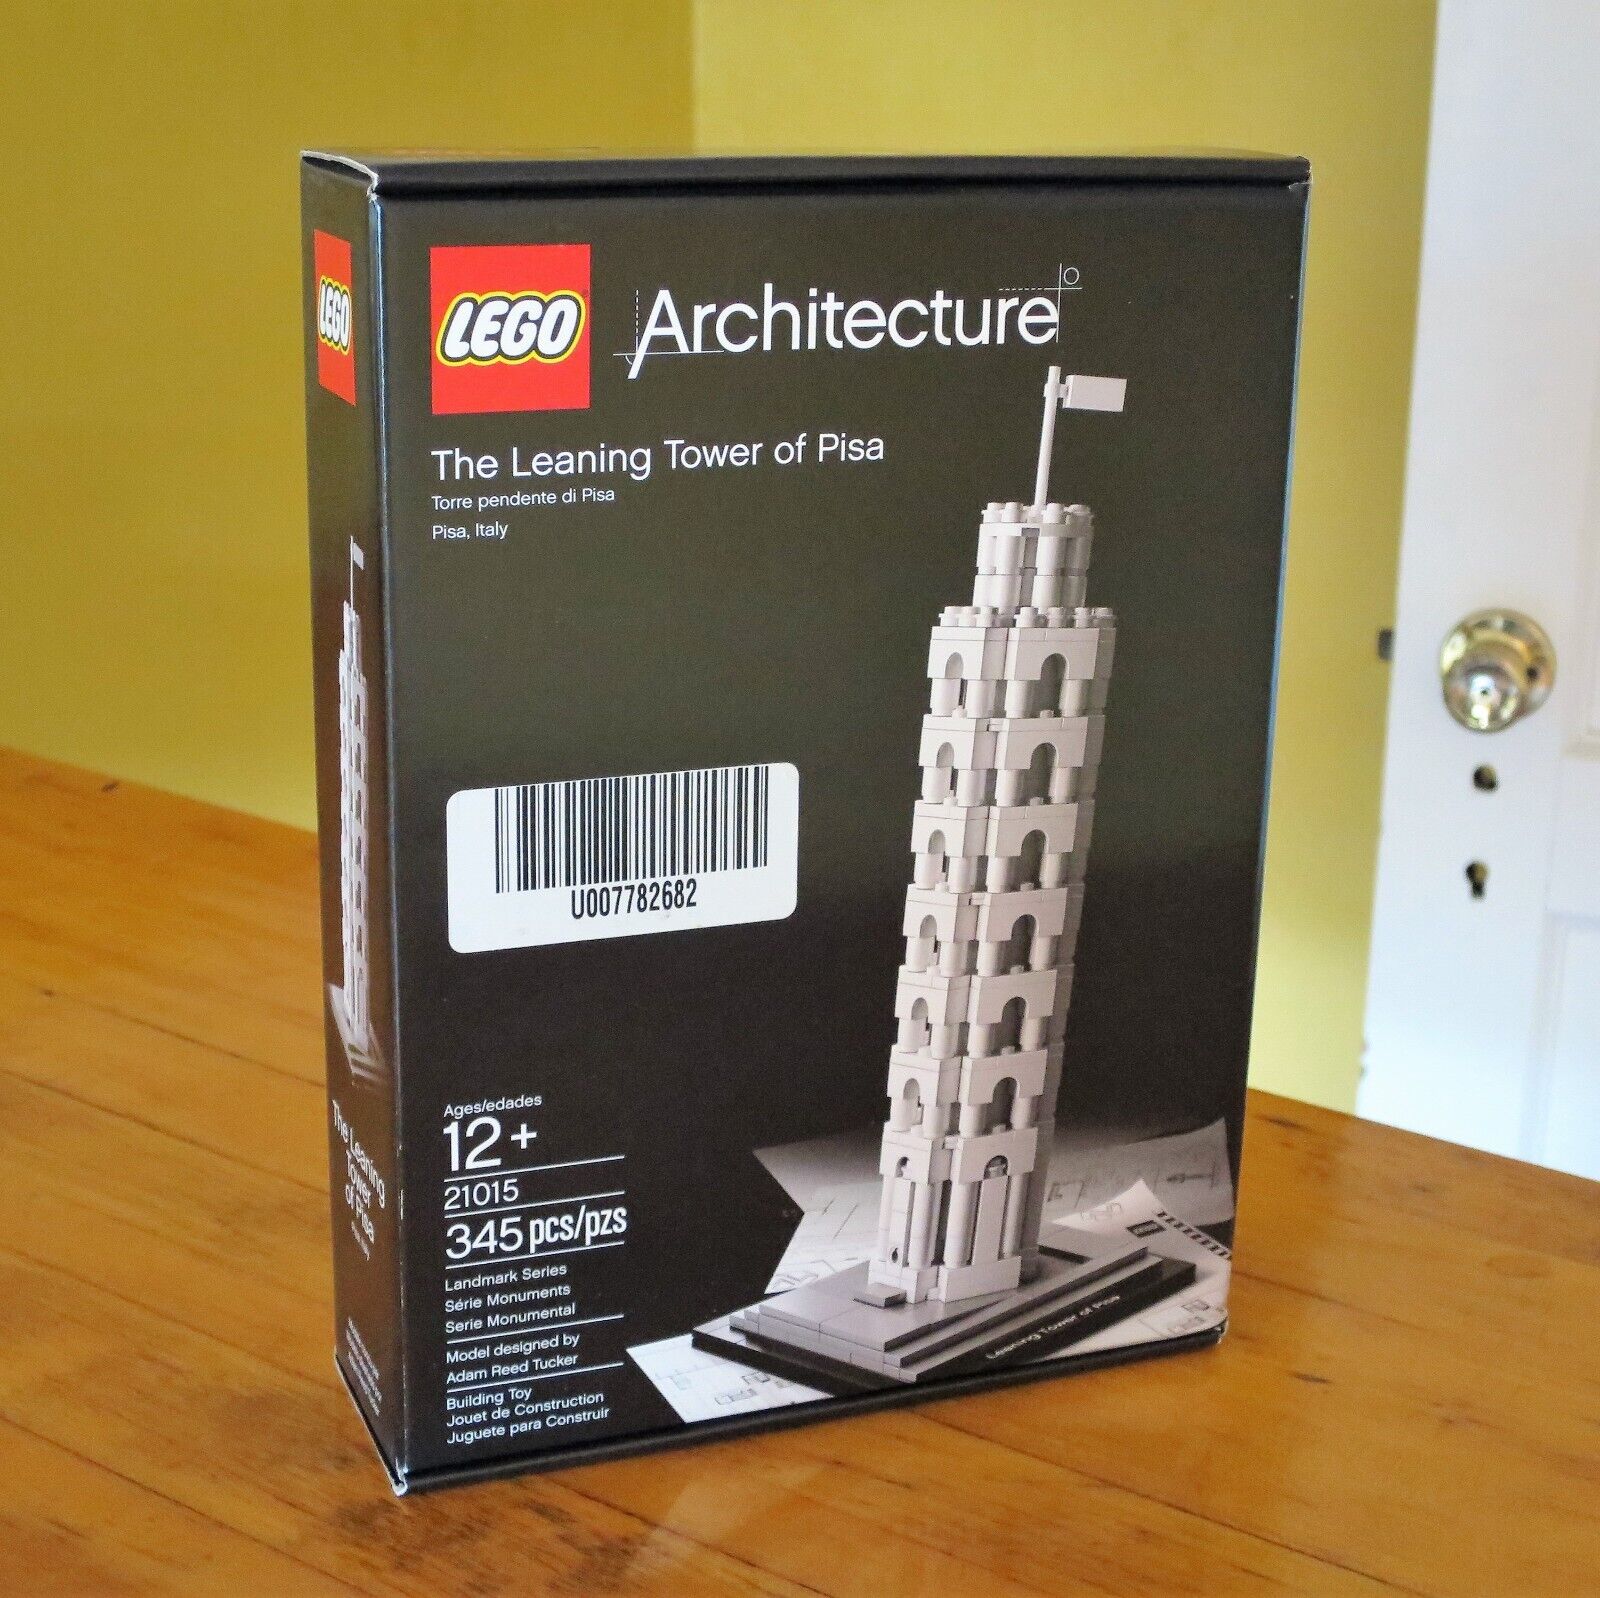 LEGO ARCHITECTURE: The Leaning Tower of Pisa (21015) - New Sealed